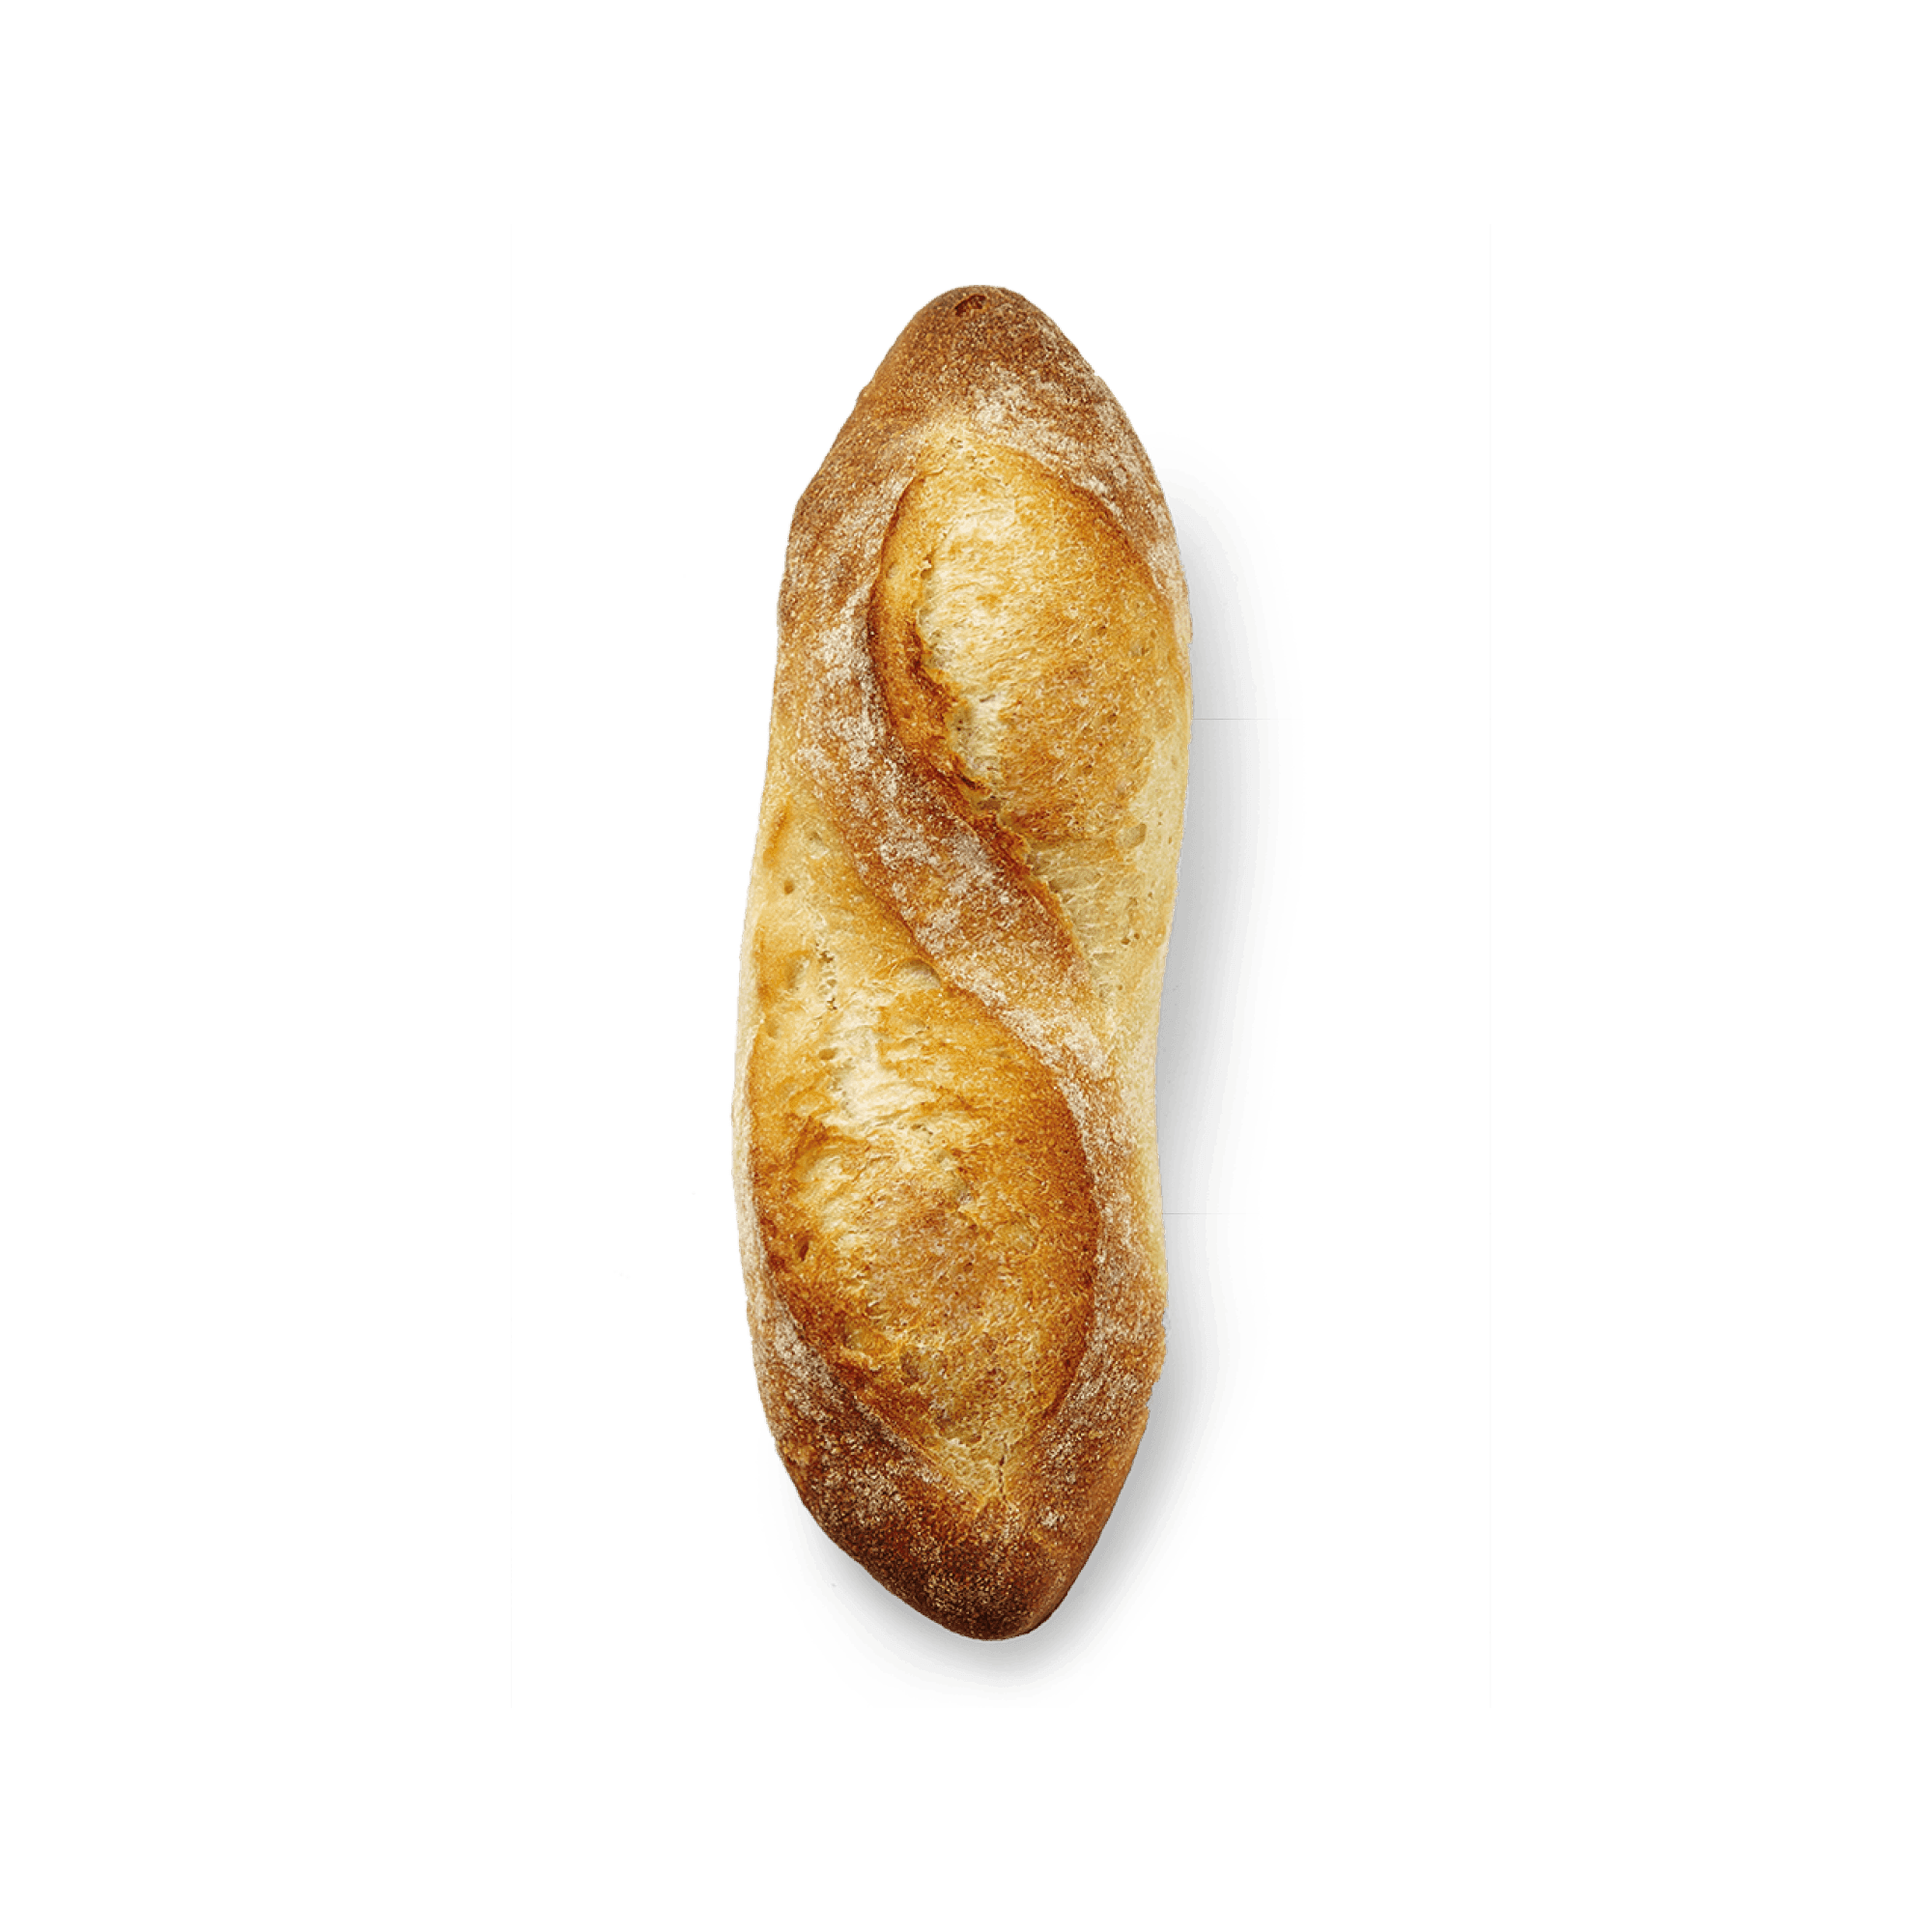 Tradition Demi-Baguette - Savory Gourmet